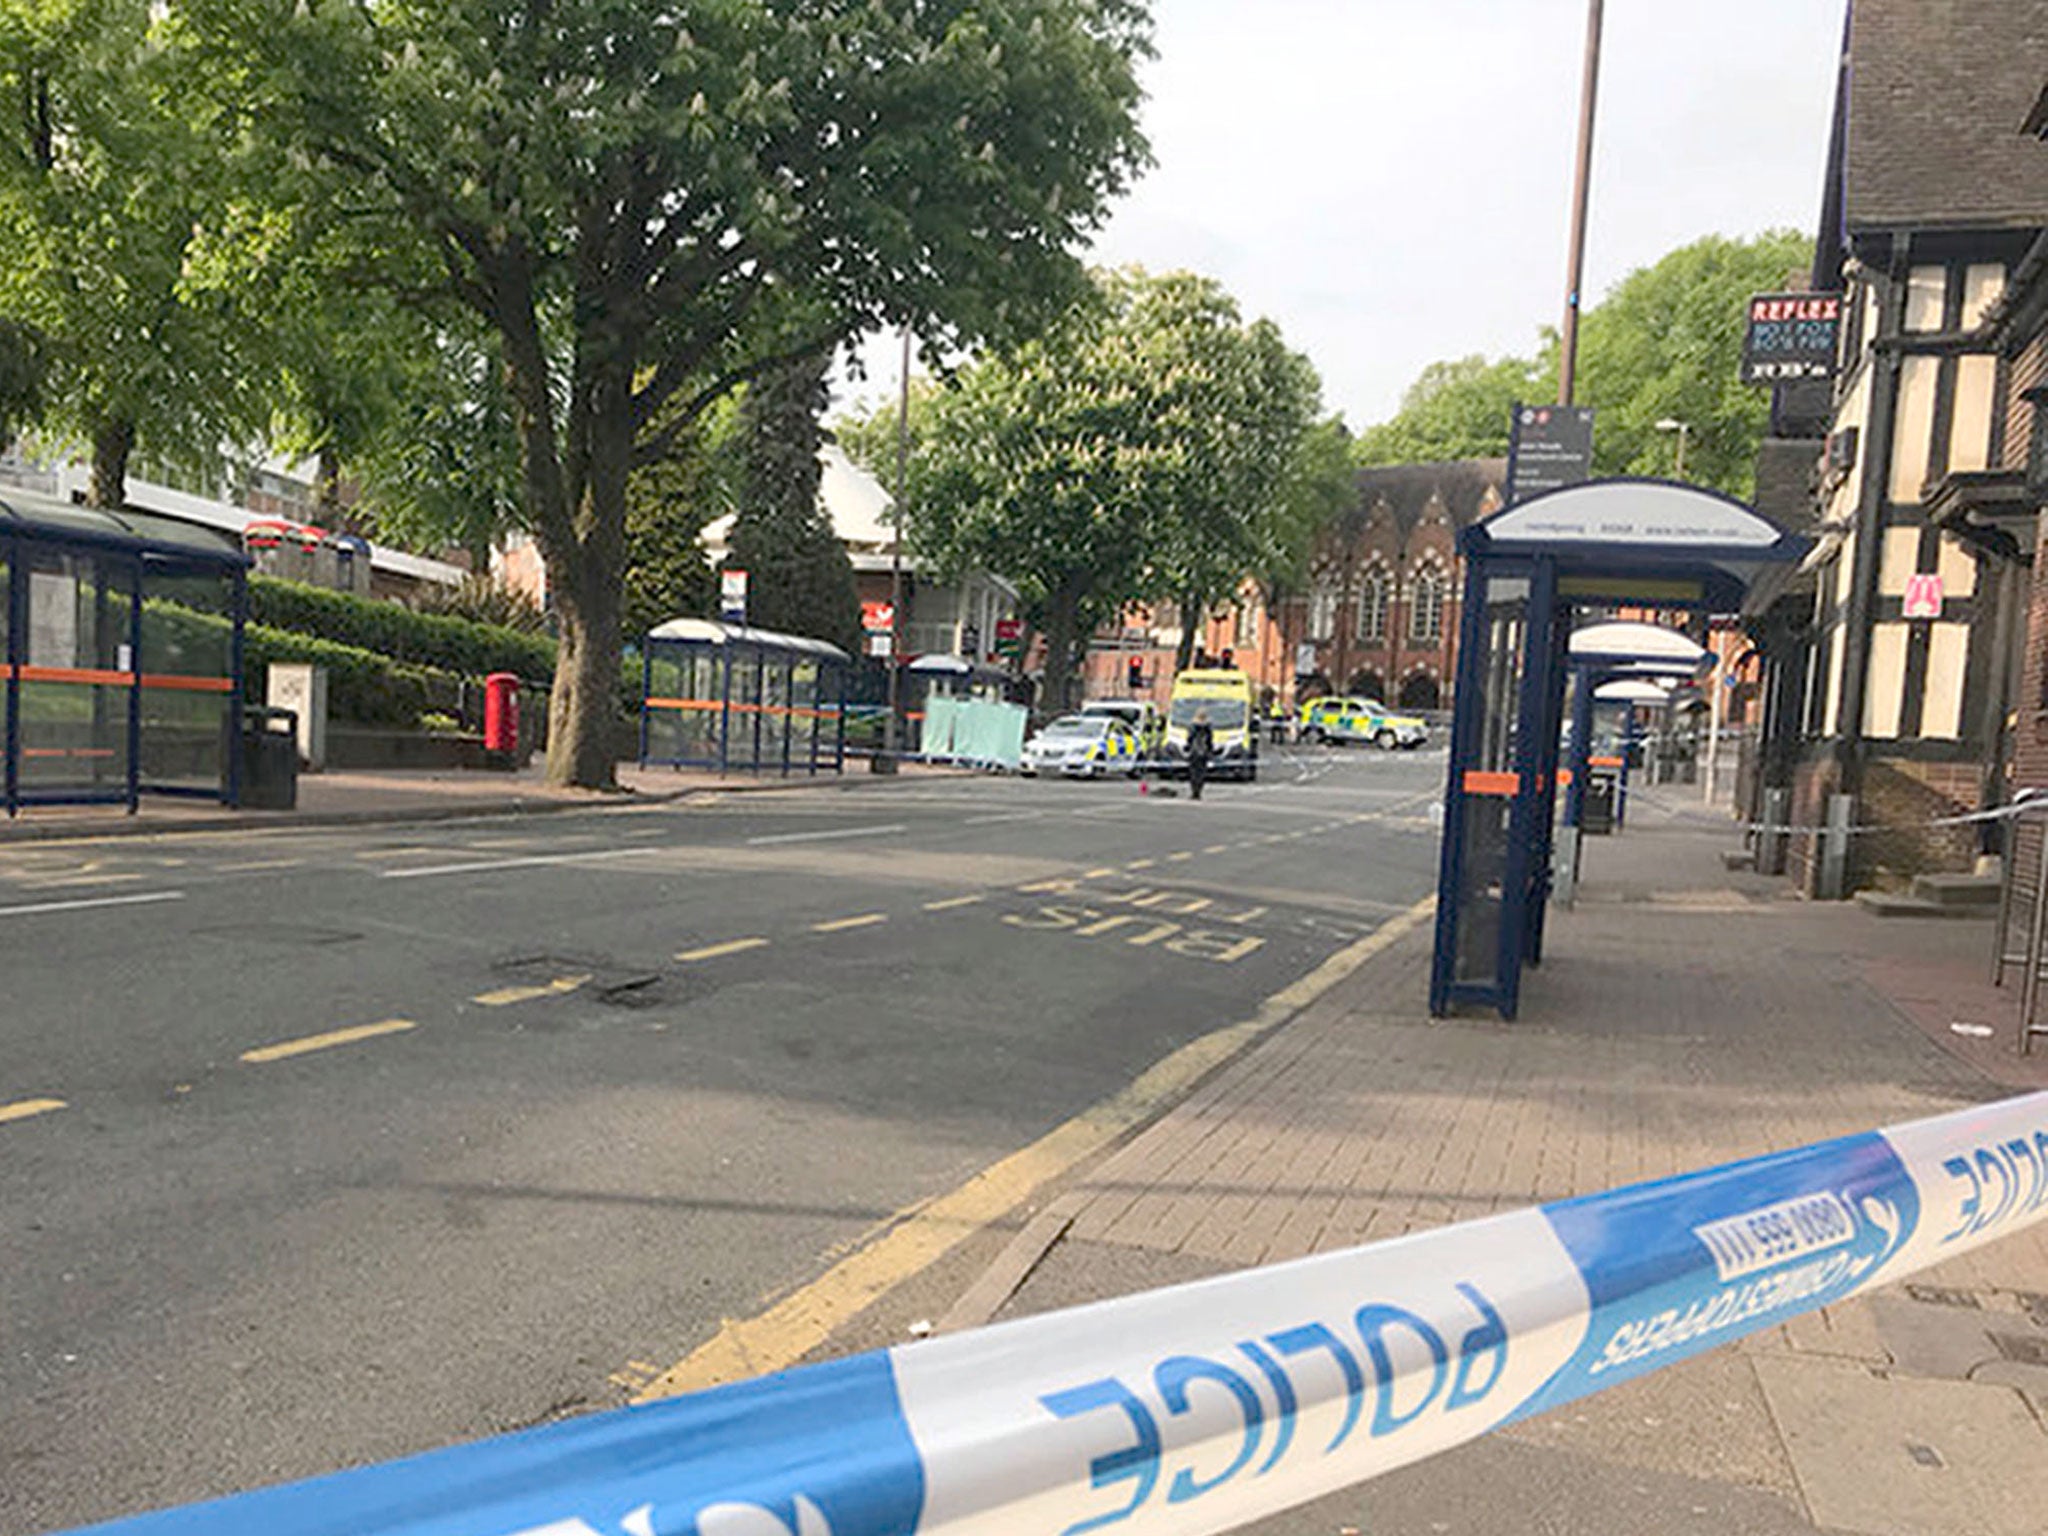 Police activity at the scene where a 16-year-old was found with serious stab wounds and despite the efforts of the emergency services the teenager was pronounced dead at the scene in Lower Parade, Sutton Coldfield.